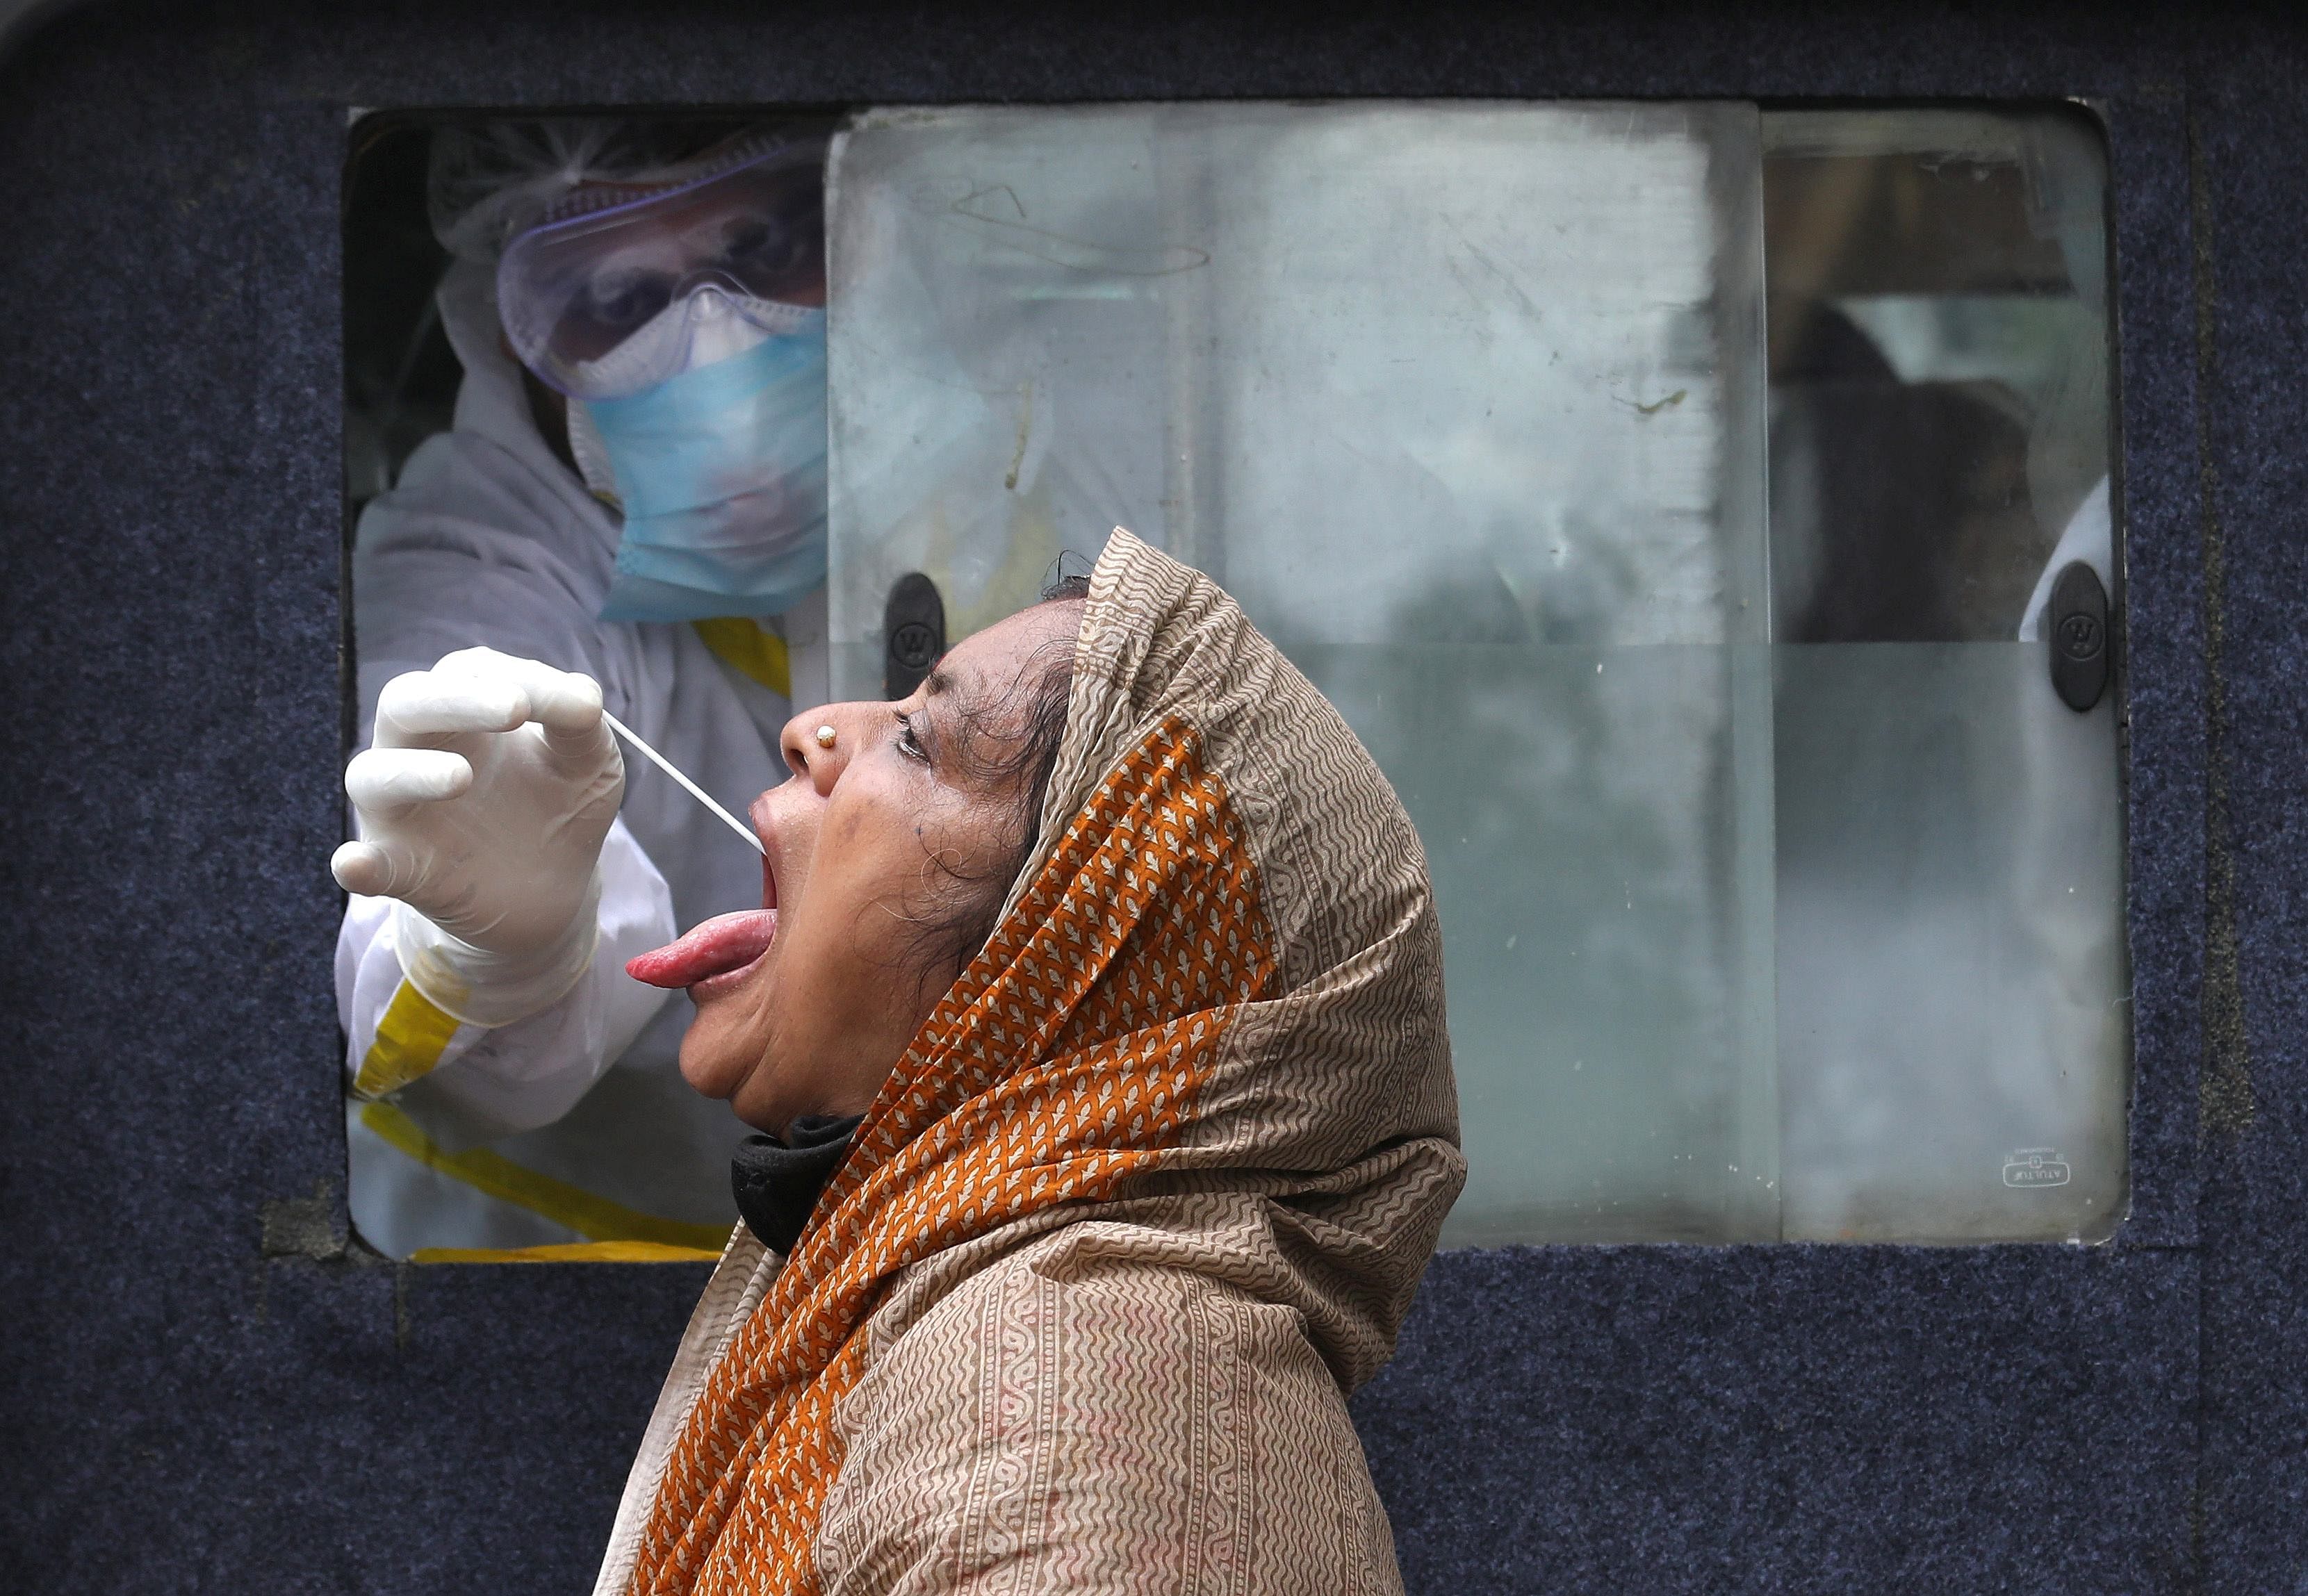 A woman reacts as a healthcare worker sitting inside an ambulance takes a swab from her to test for the coronavirus disease (COVID-19) in Kolkata. Credit: Reuters